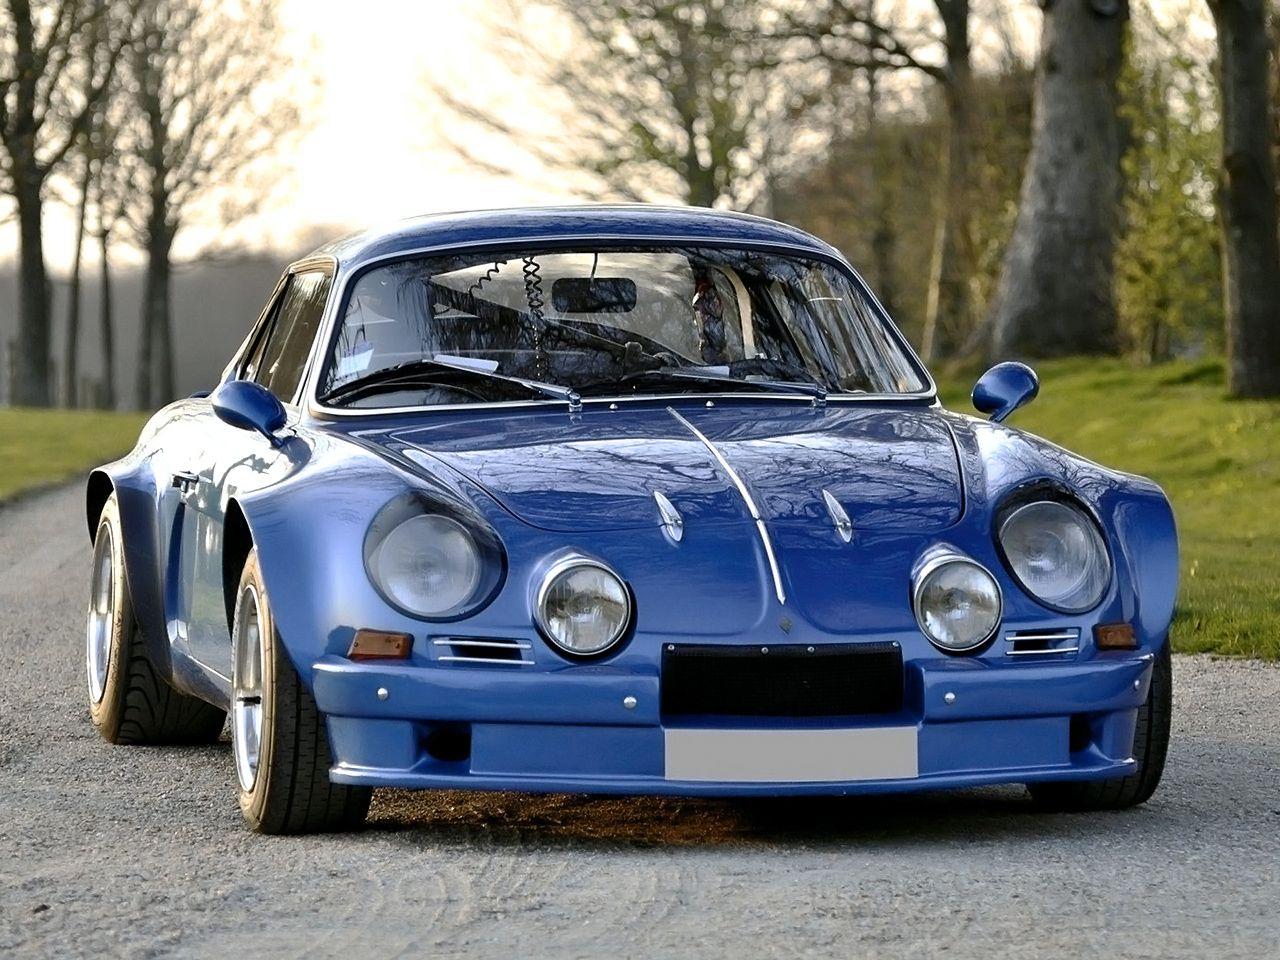 Renault Alpine A110 1300 Group 4 '1971 Wallpaper and Background